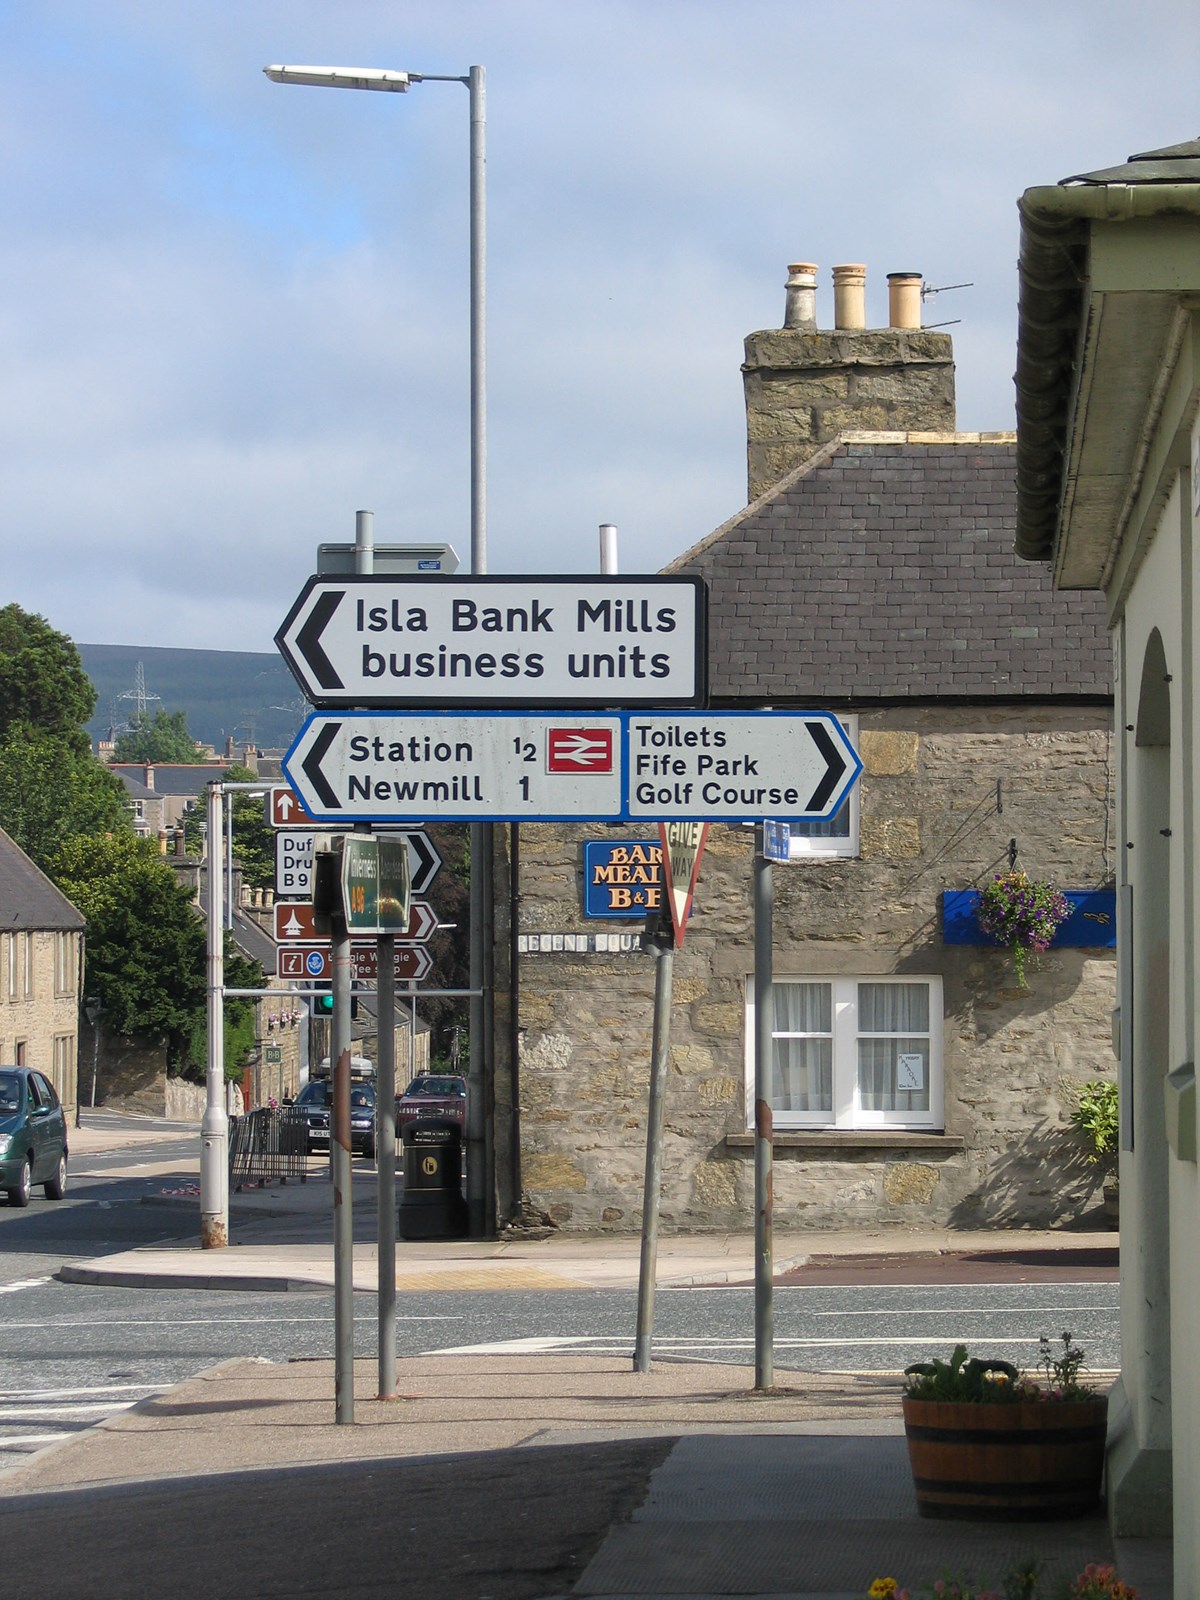 Road signs in Keith